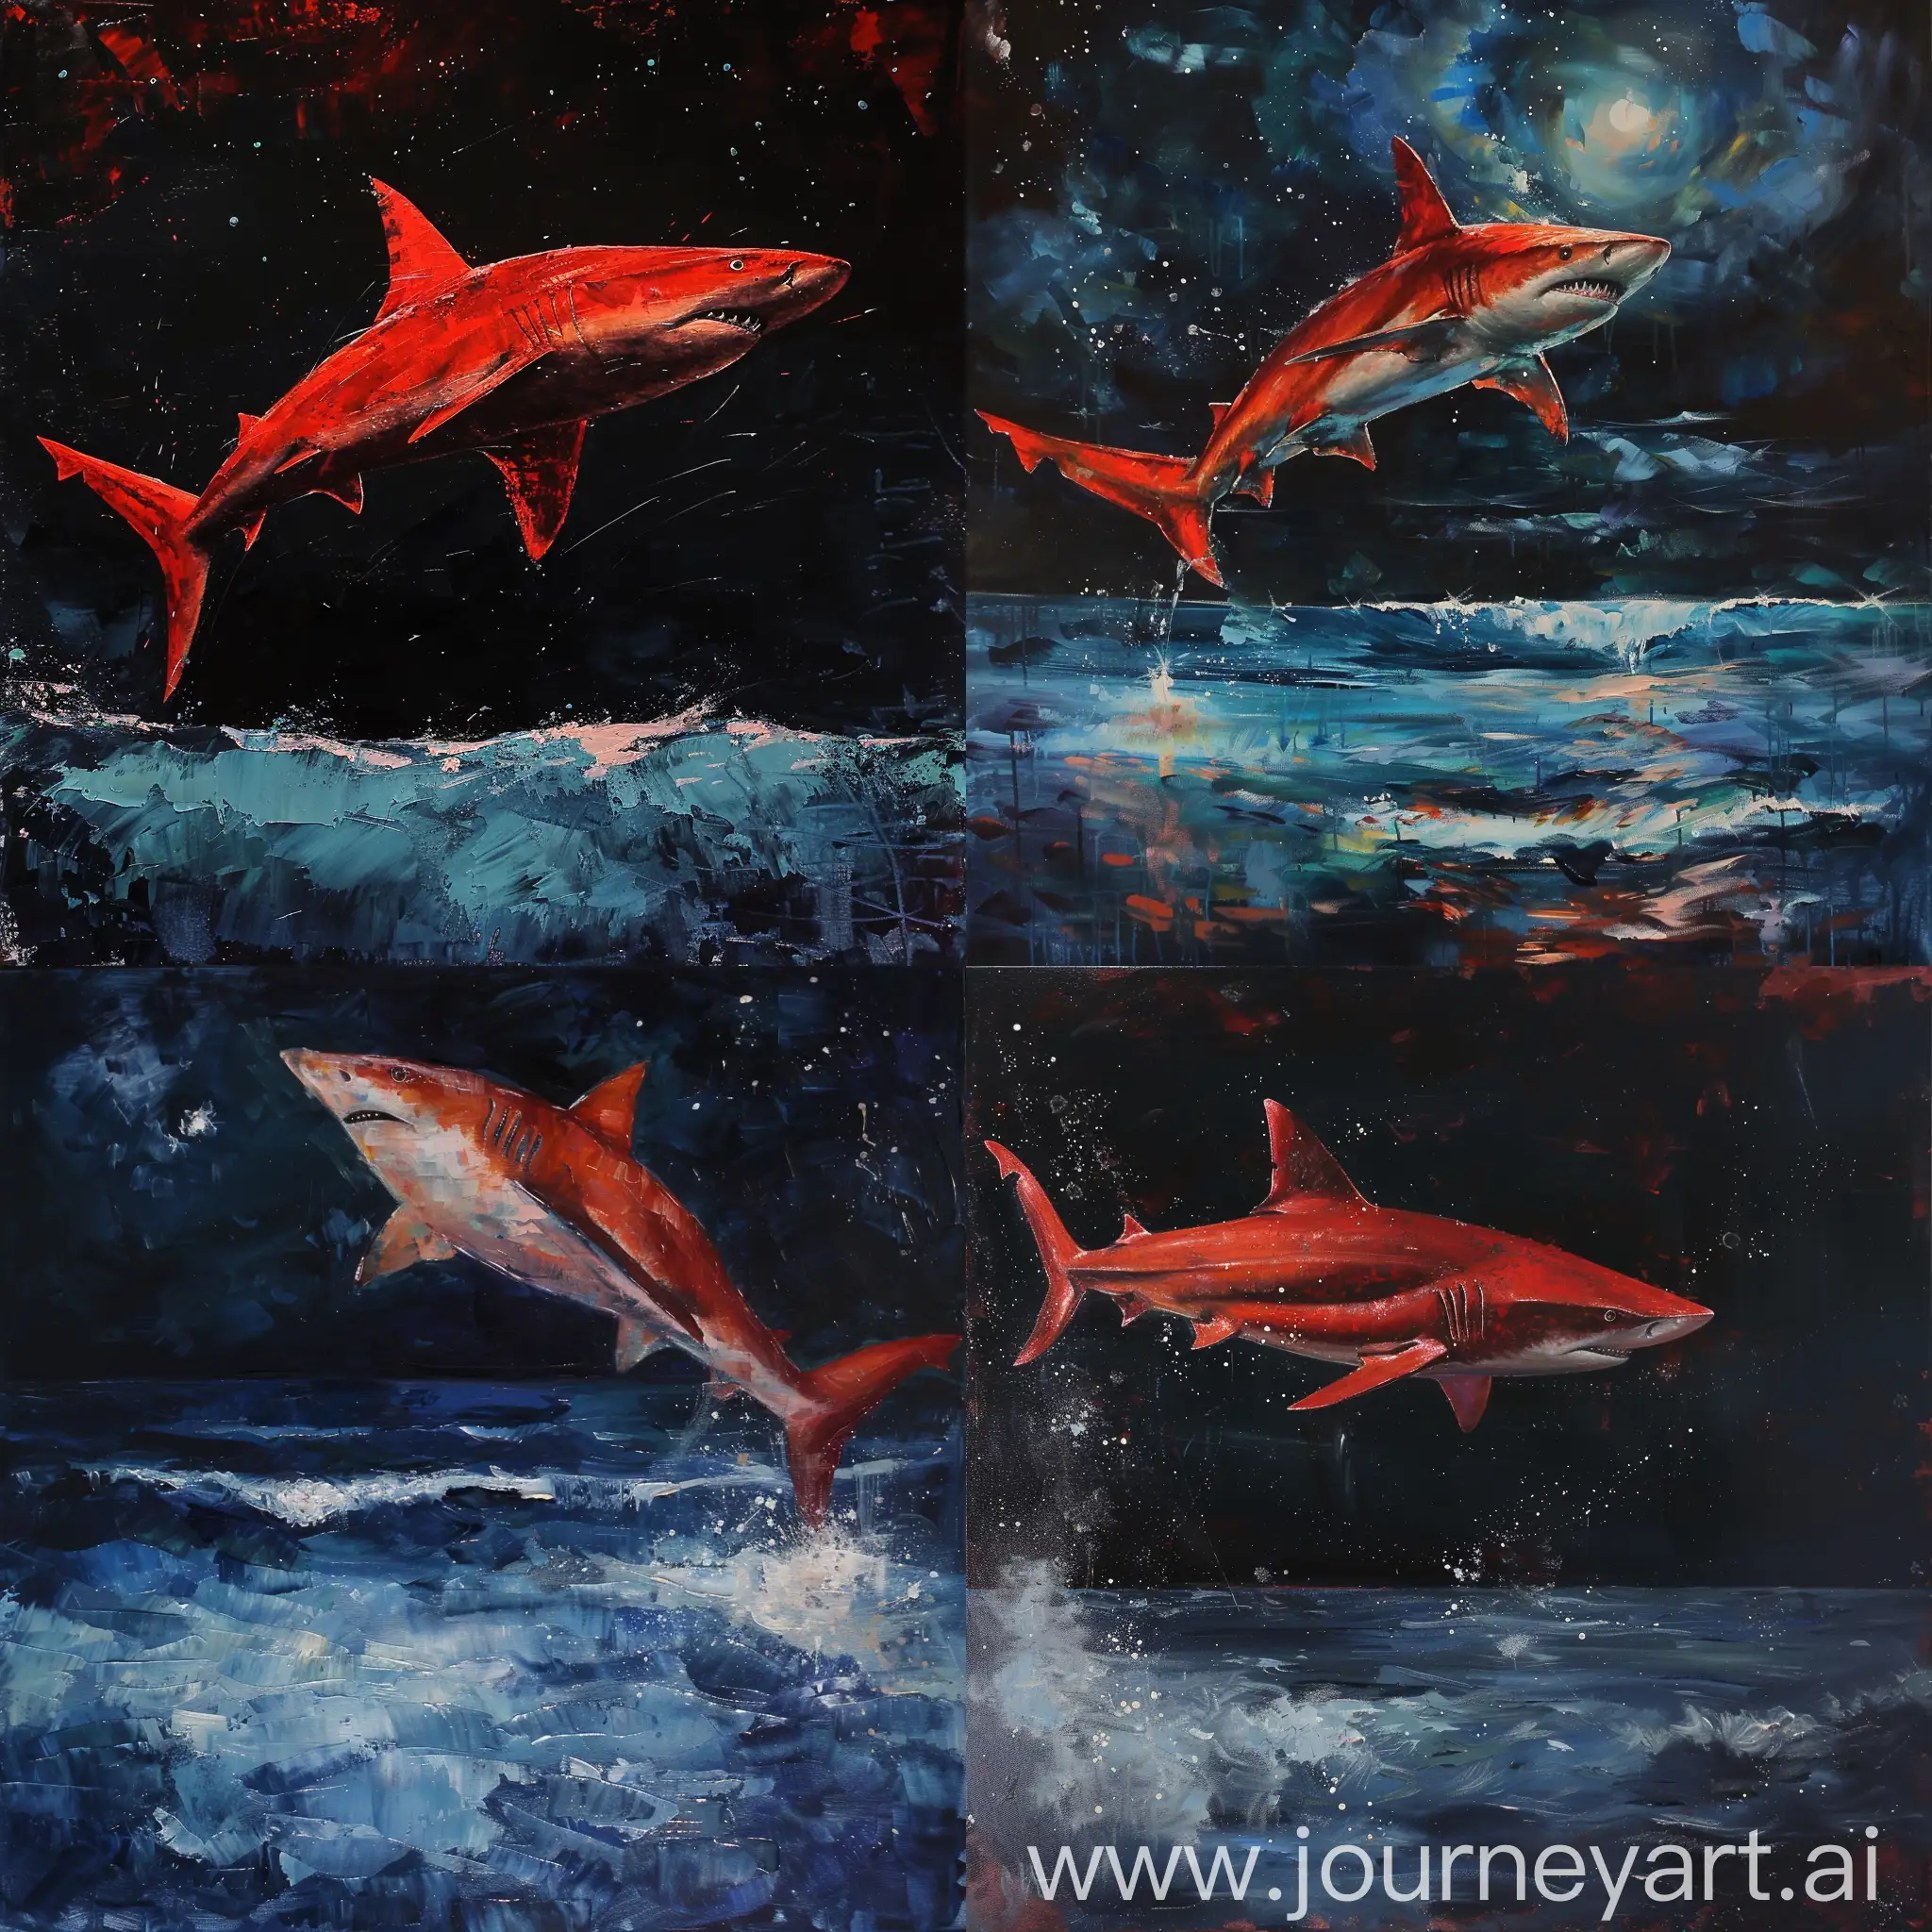 Majestic red shark jumped out of the endless ocean, dreamy dark night, pale dead colors, oil painting